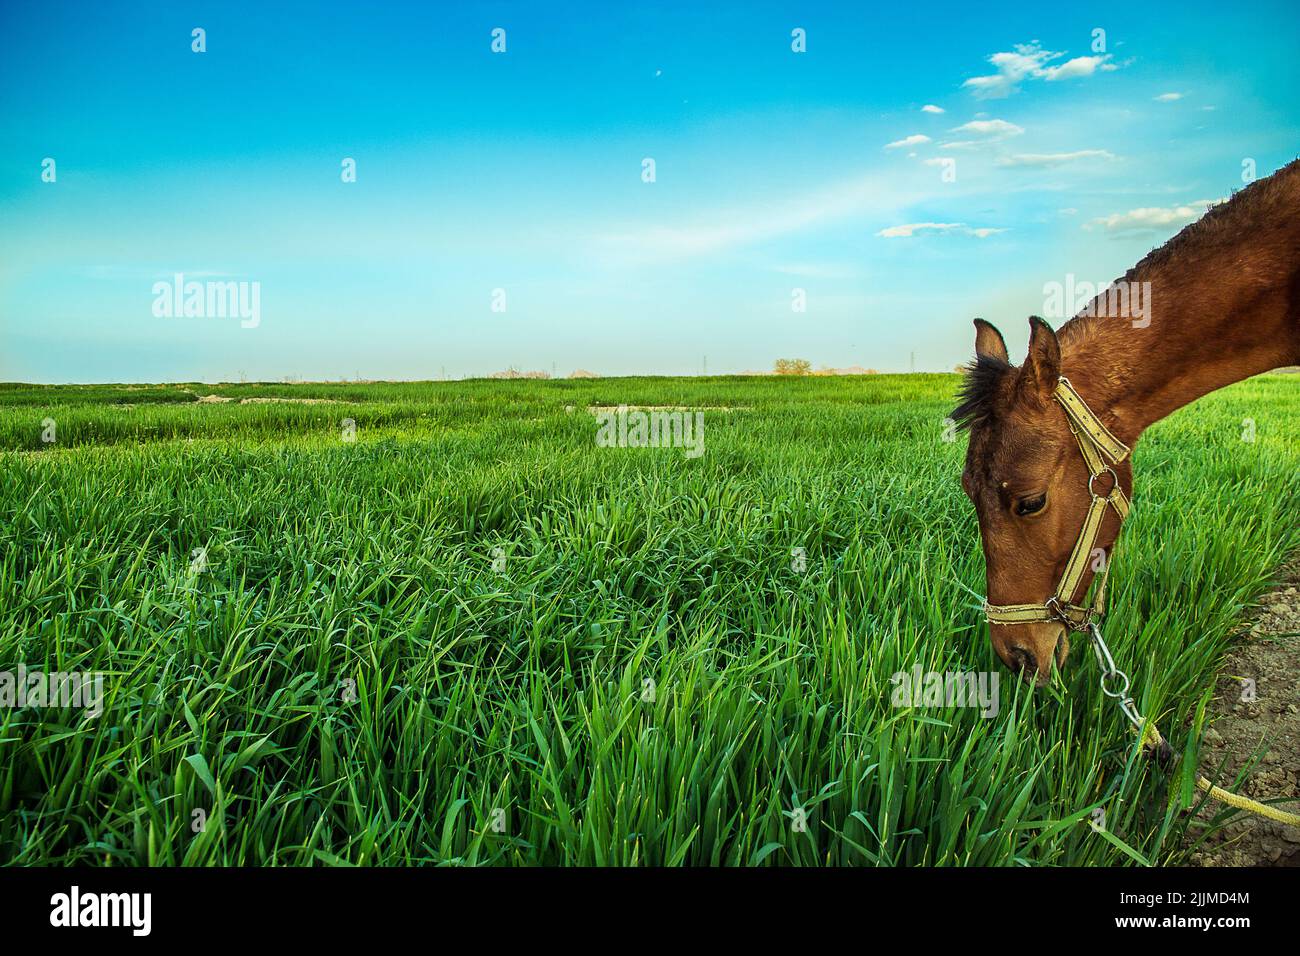 A closeup of a horse and grass in farm Stock Photo